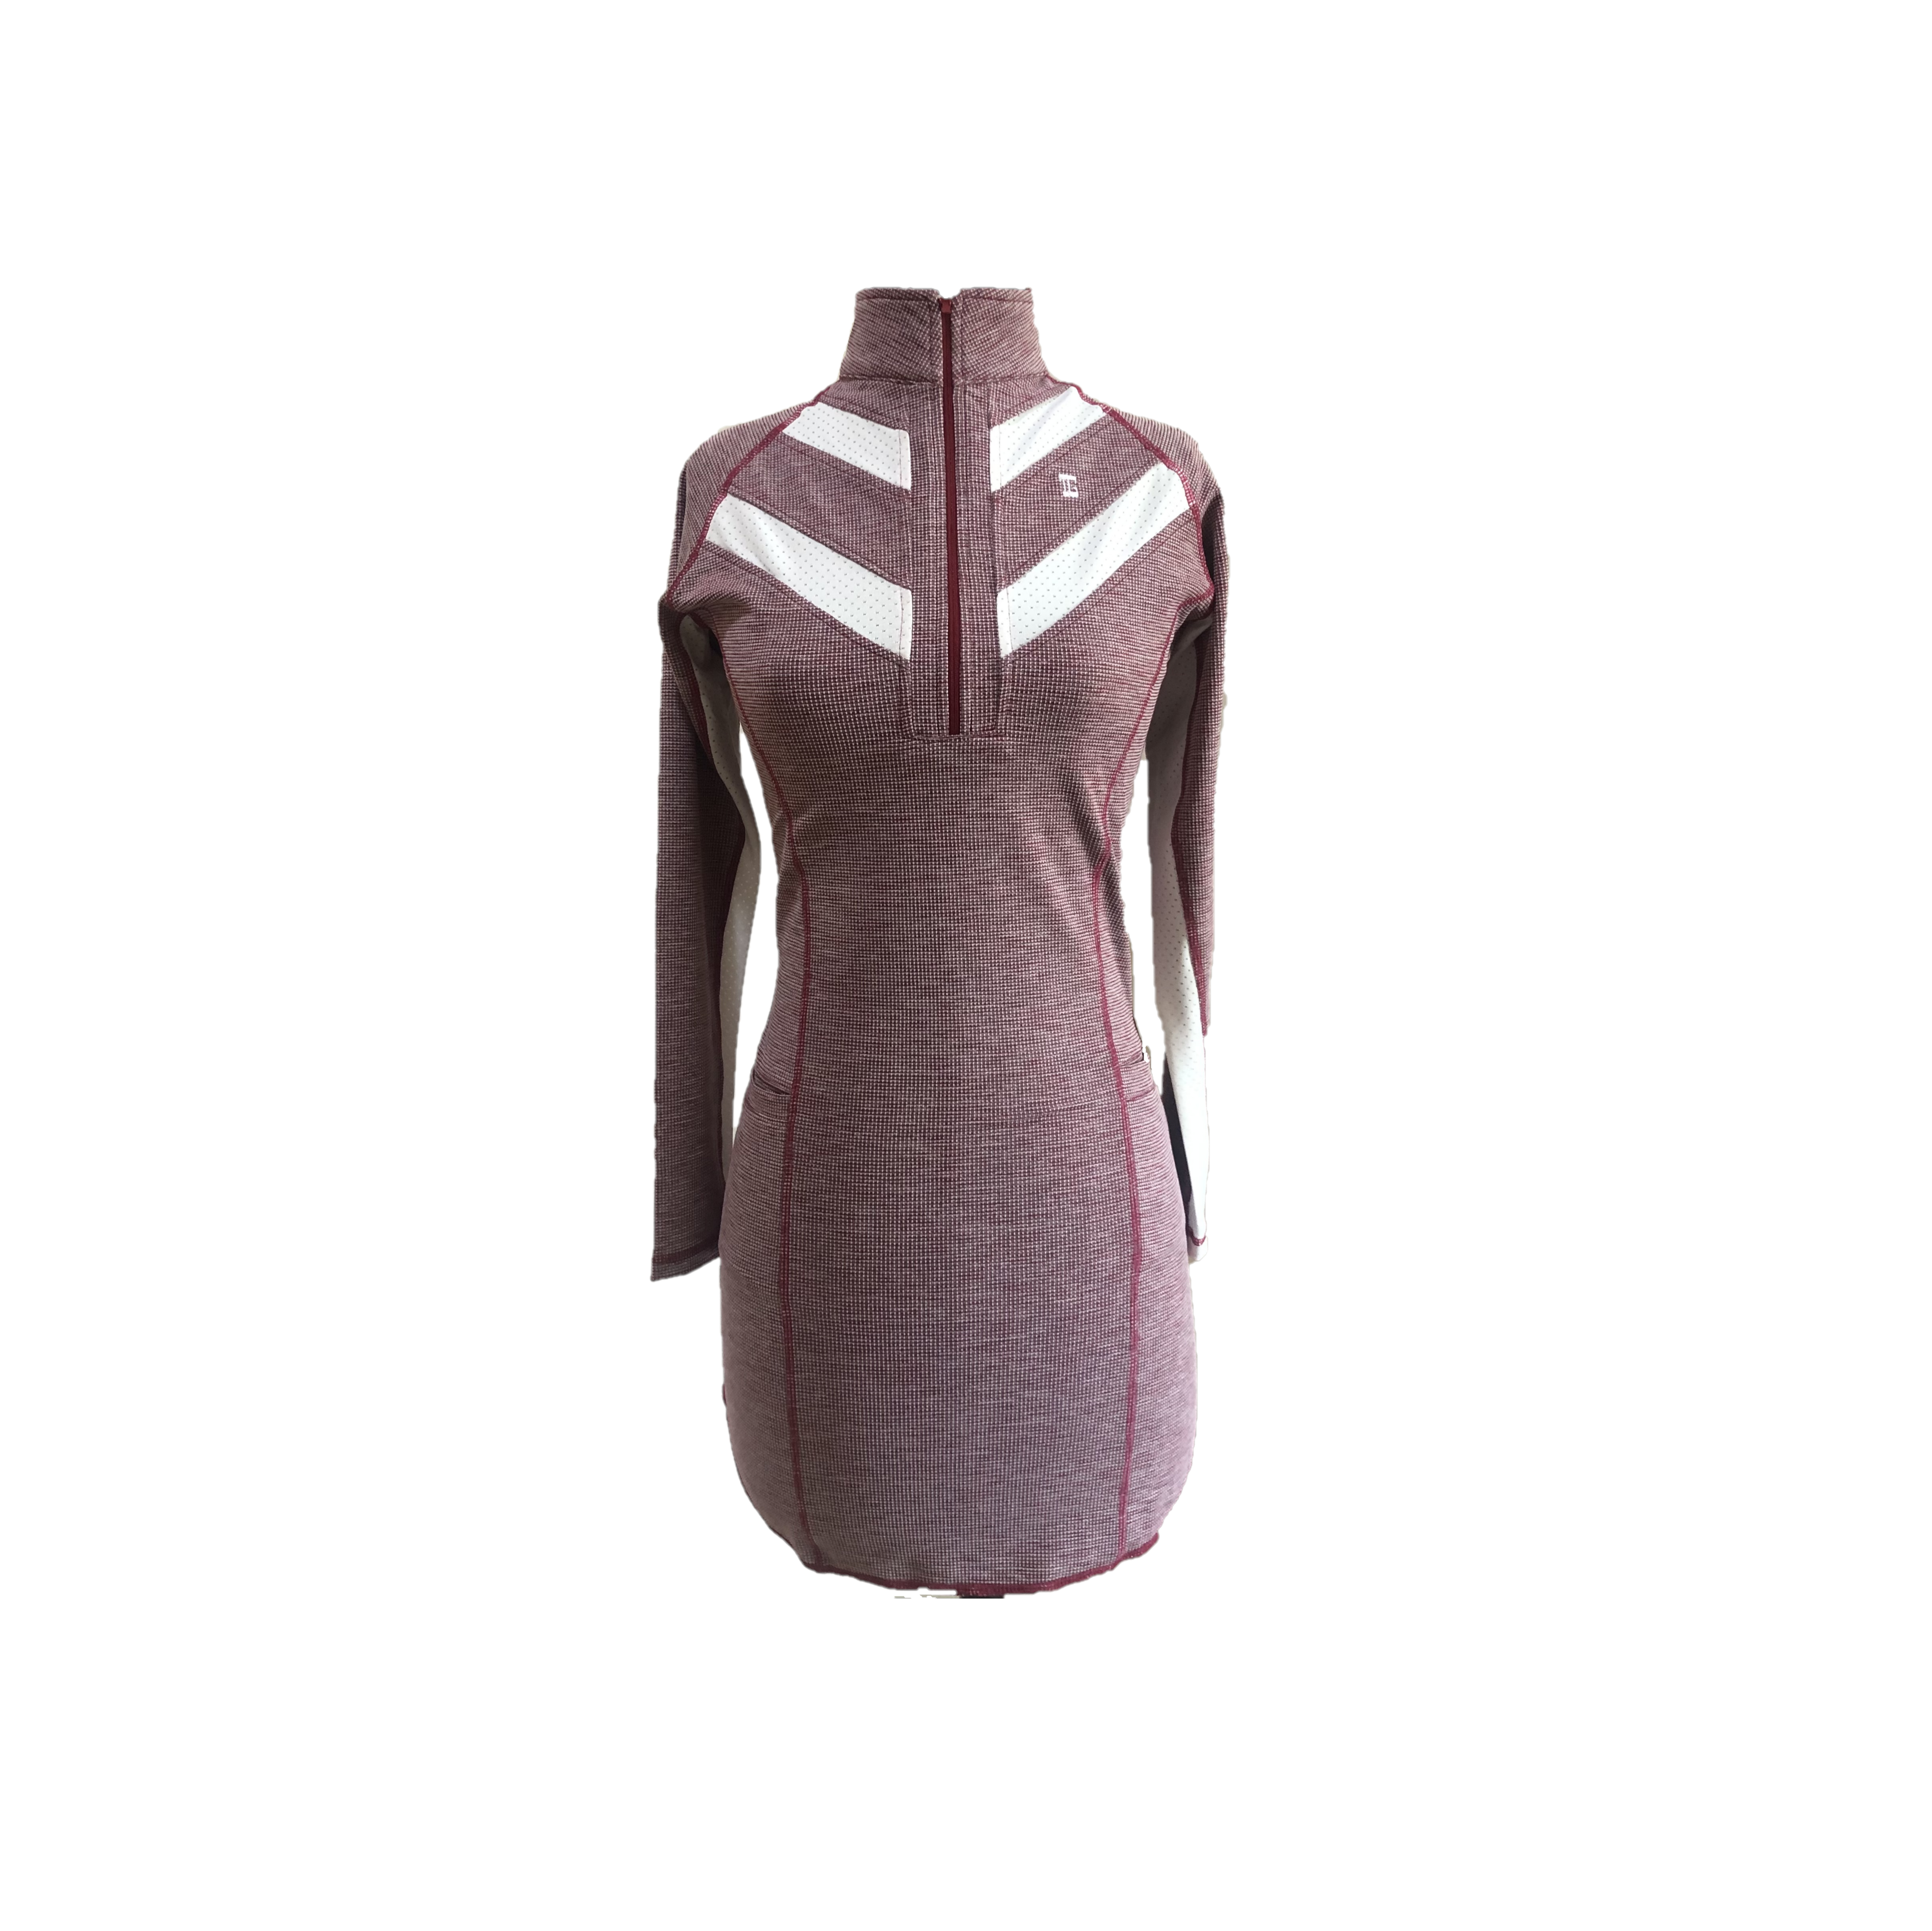 GD-018A || Golf Dress Long Sleeved Maroon Marble  and White Tweed  Featured Over Locked Seems  Textured Fabric, Wide Back Chevron Stripes 2 Each Side of Front Collar, Zip Mock Polo Neck, 2 Front Pockets with black Trim